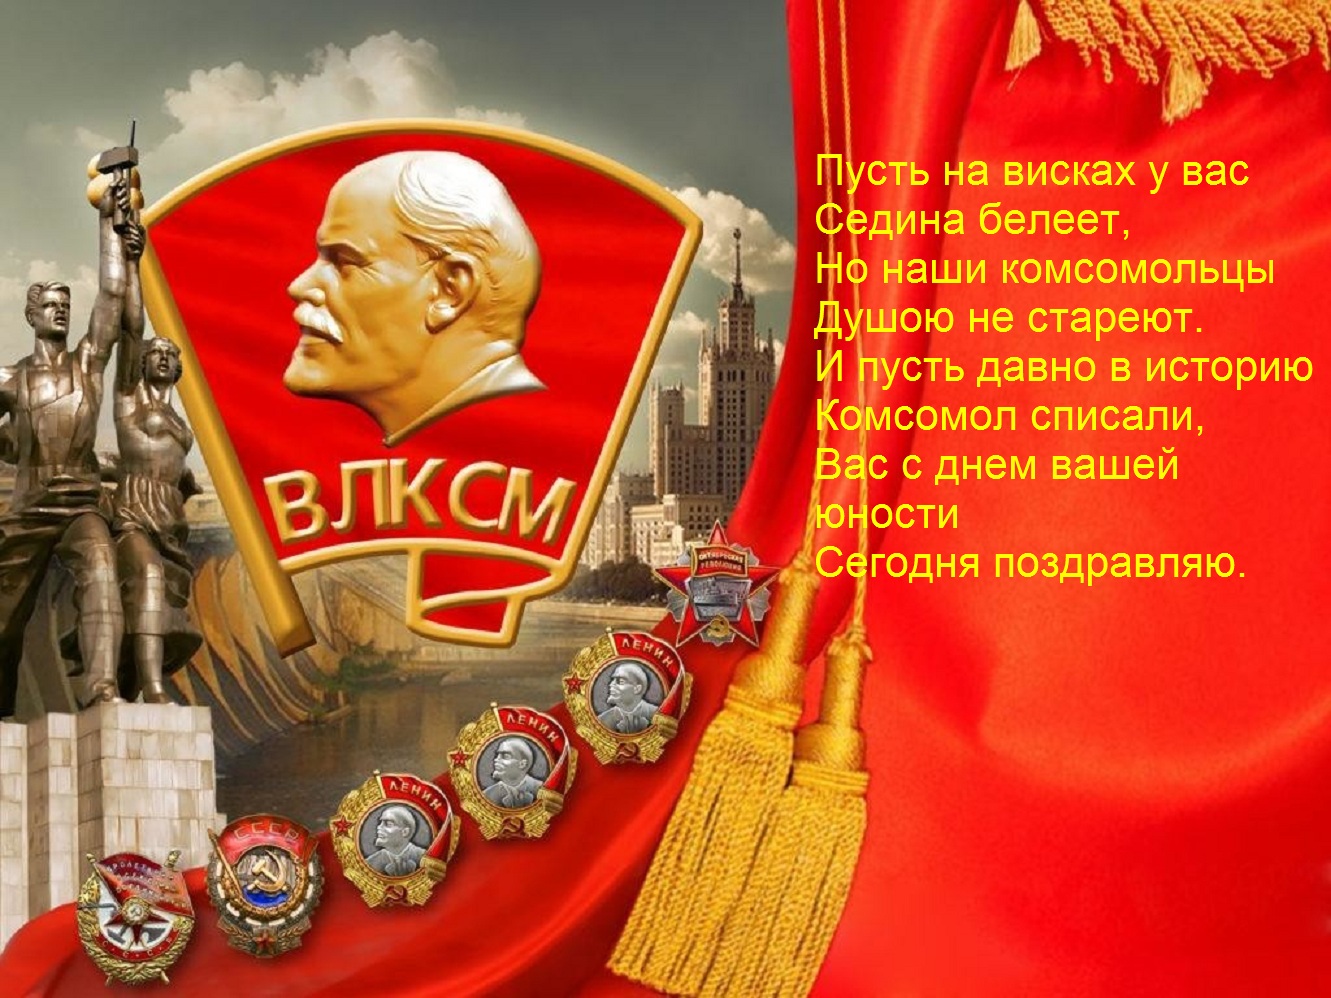 A postcard on the subject of flag verse komsomol badge for free